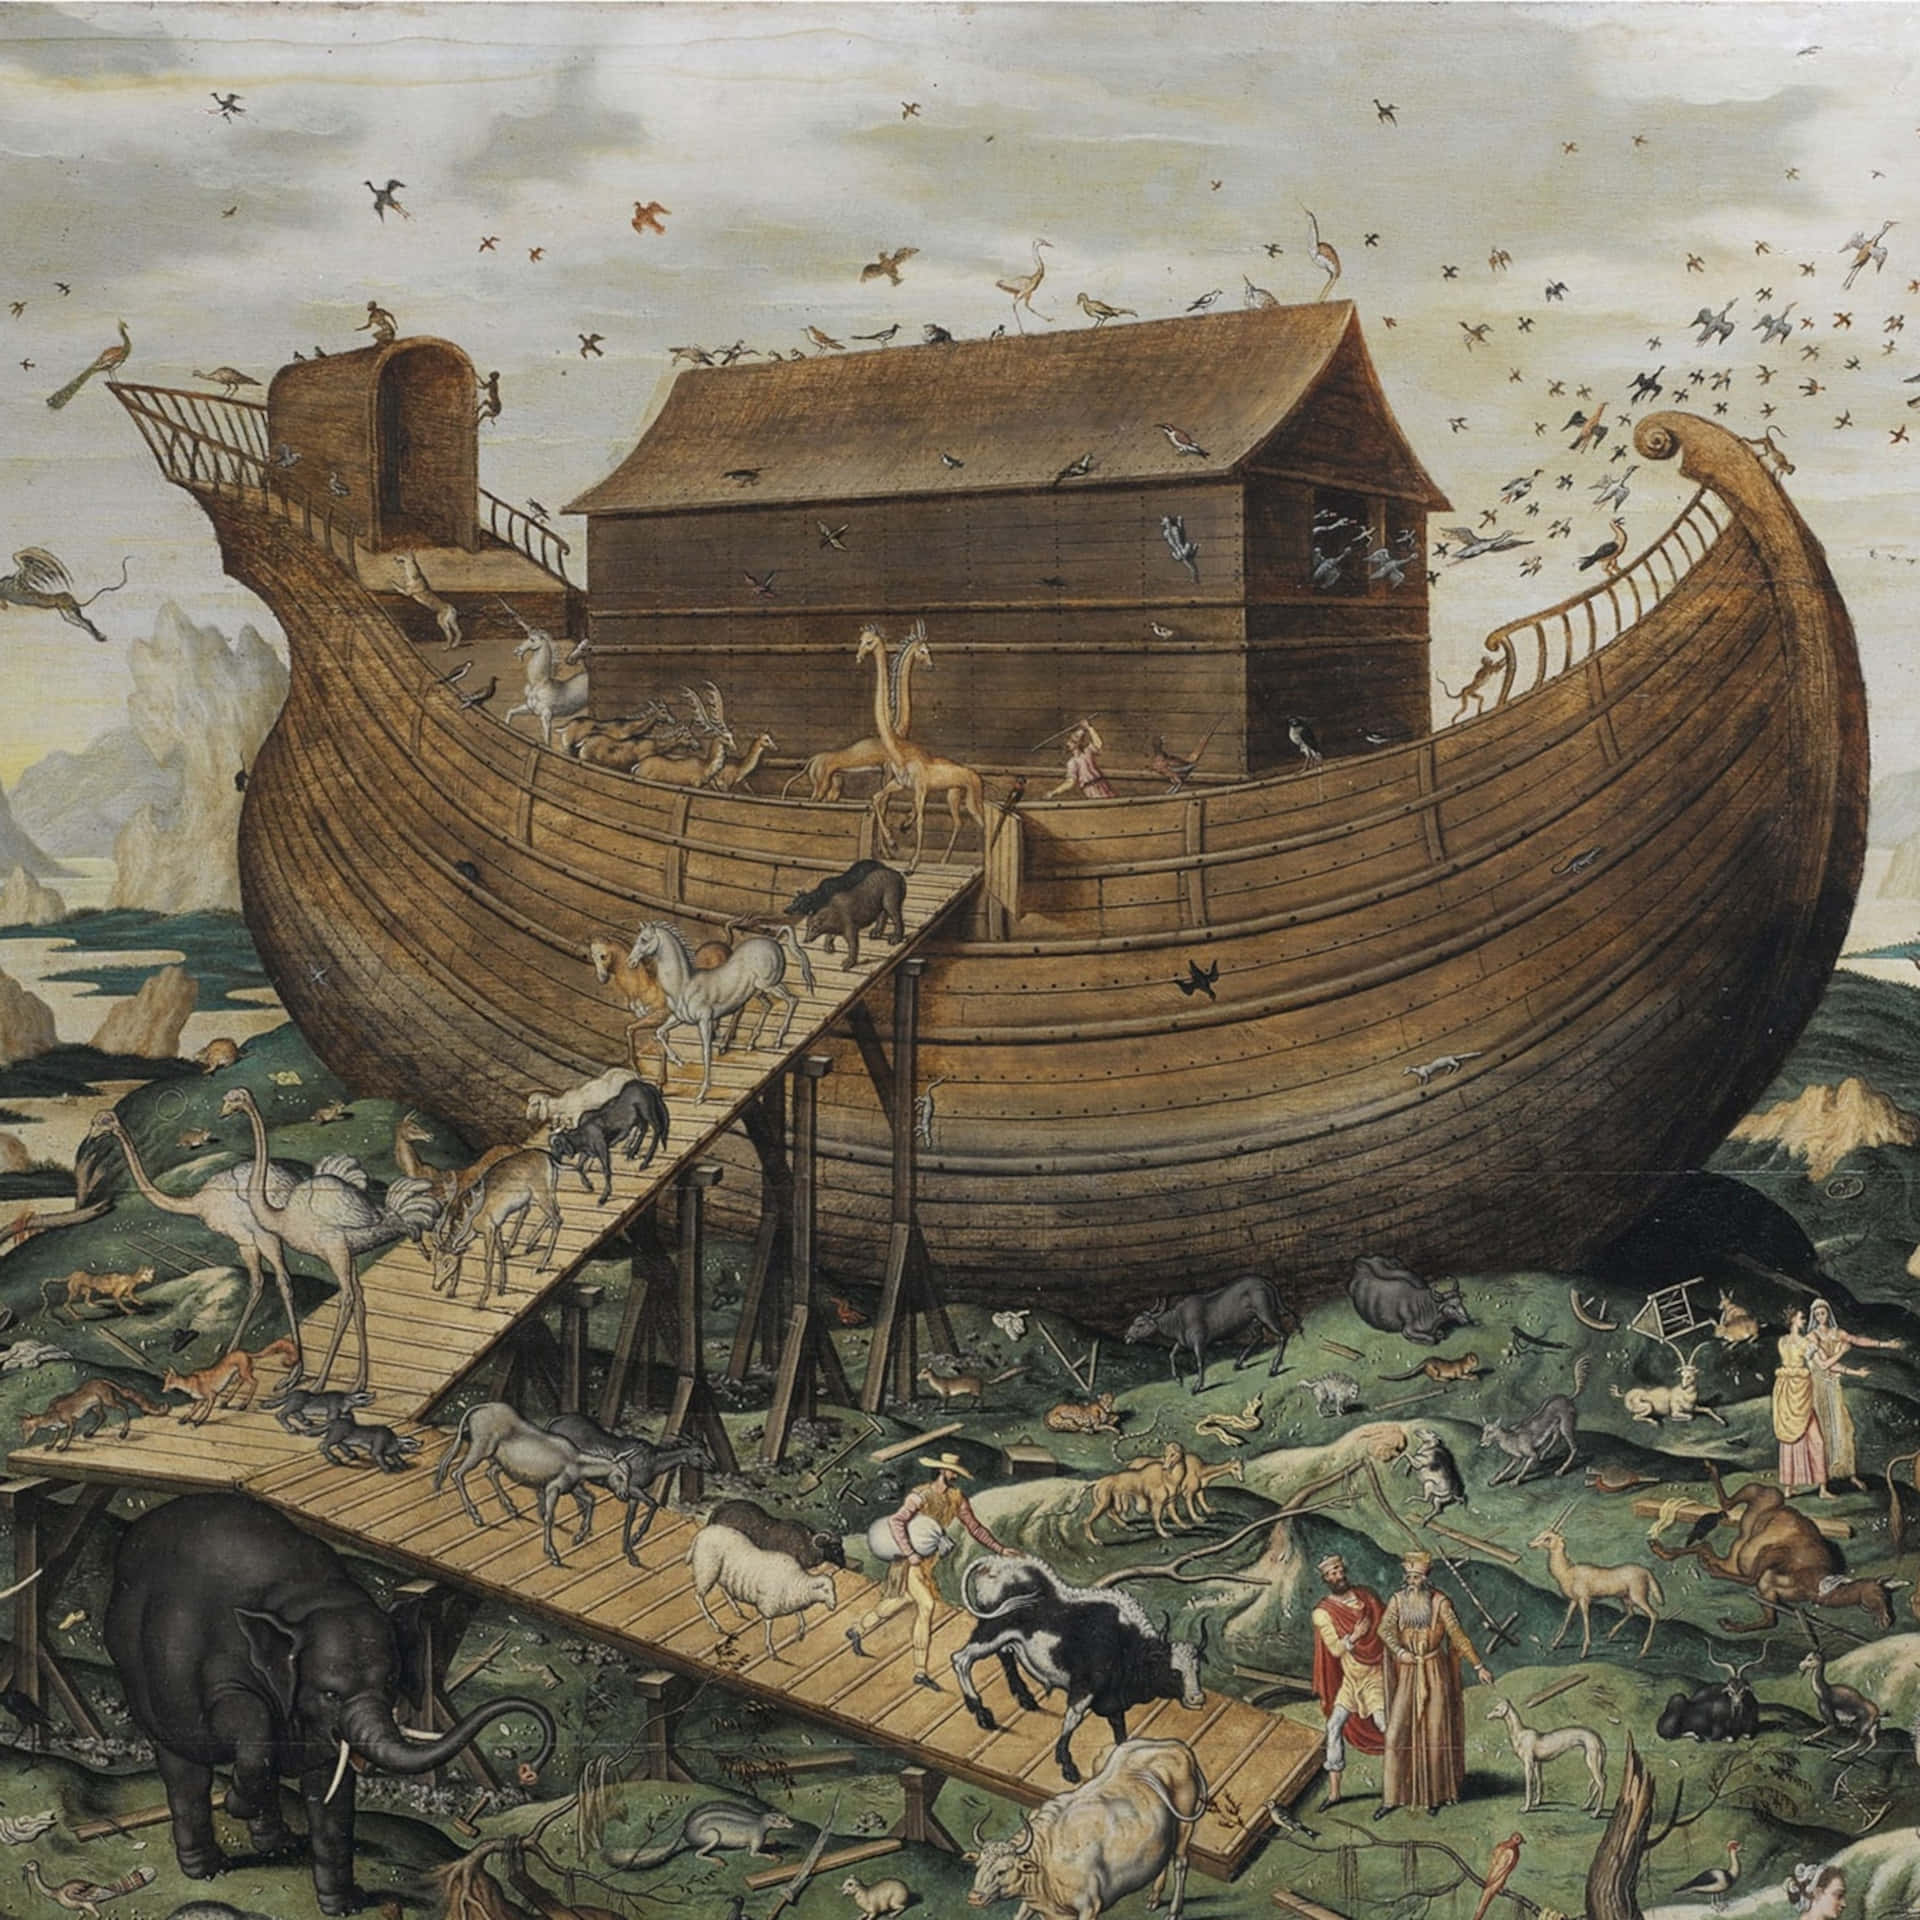 Noah's Ark, the vessel sent by God to save humanity